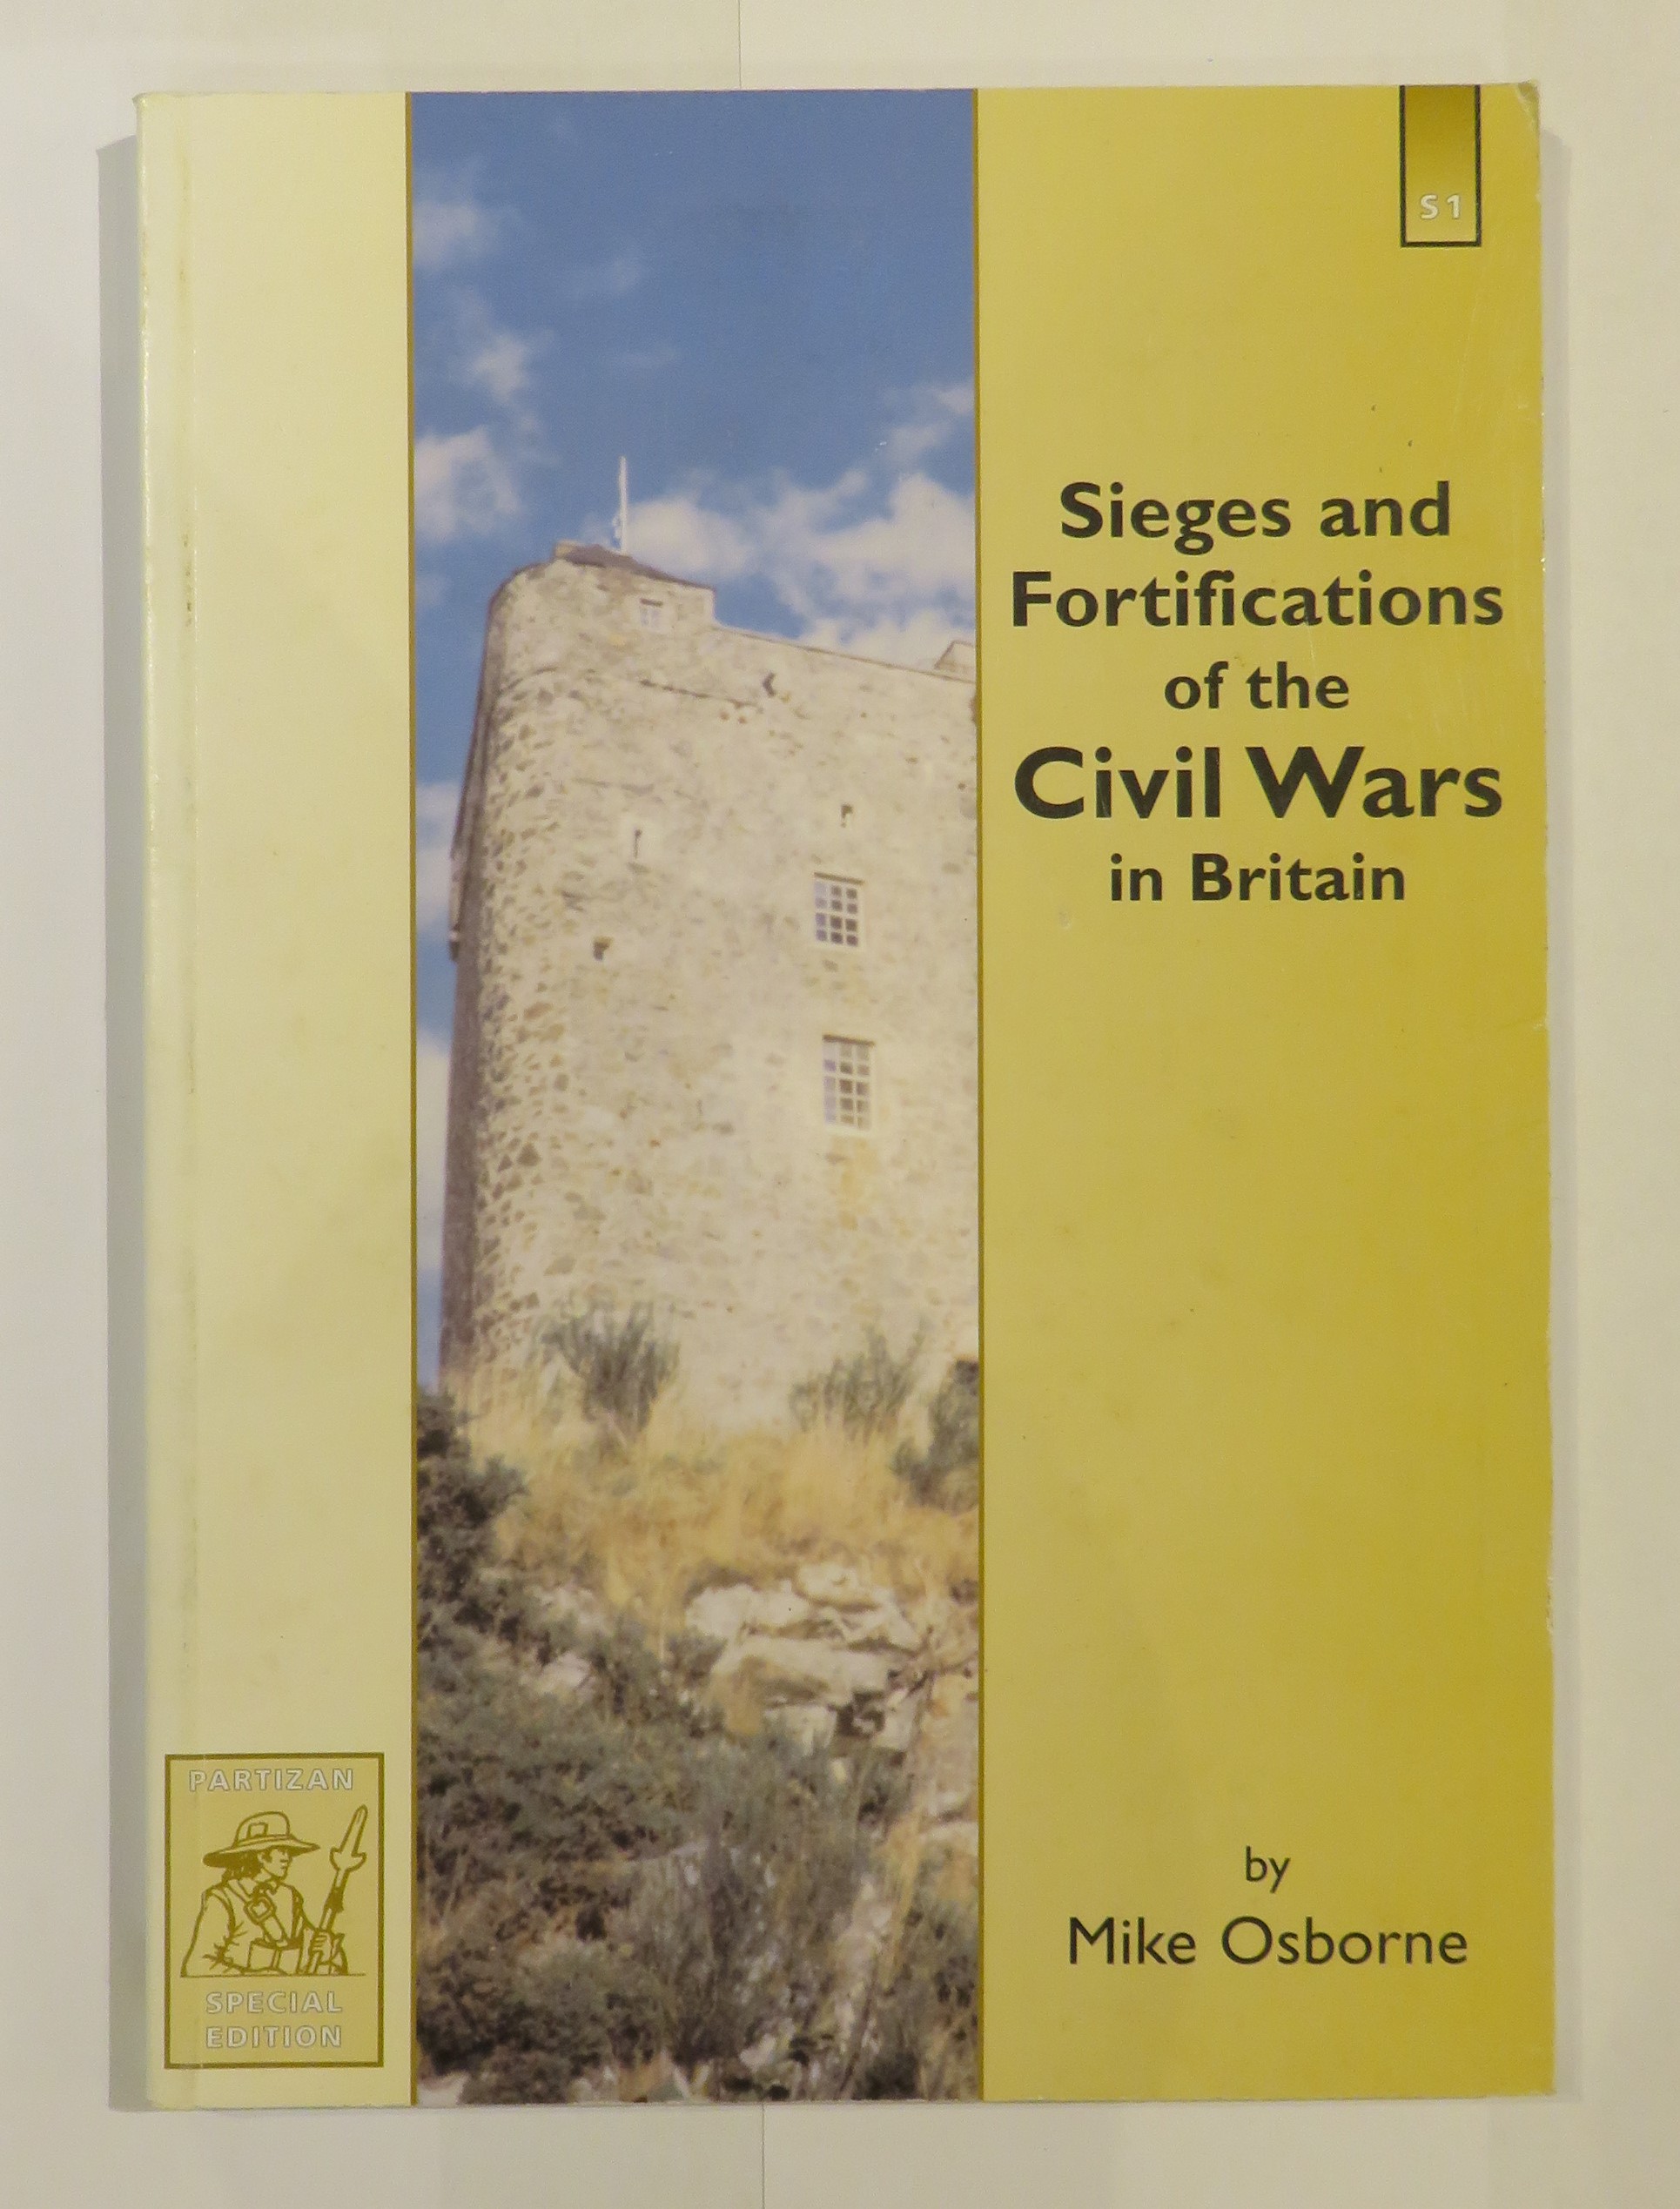 Sieges and Fortifications of the Civil Wars in Britain